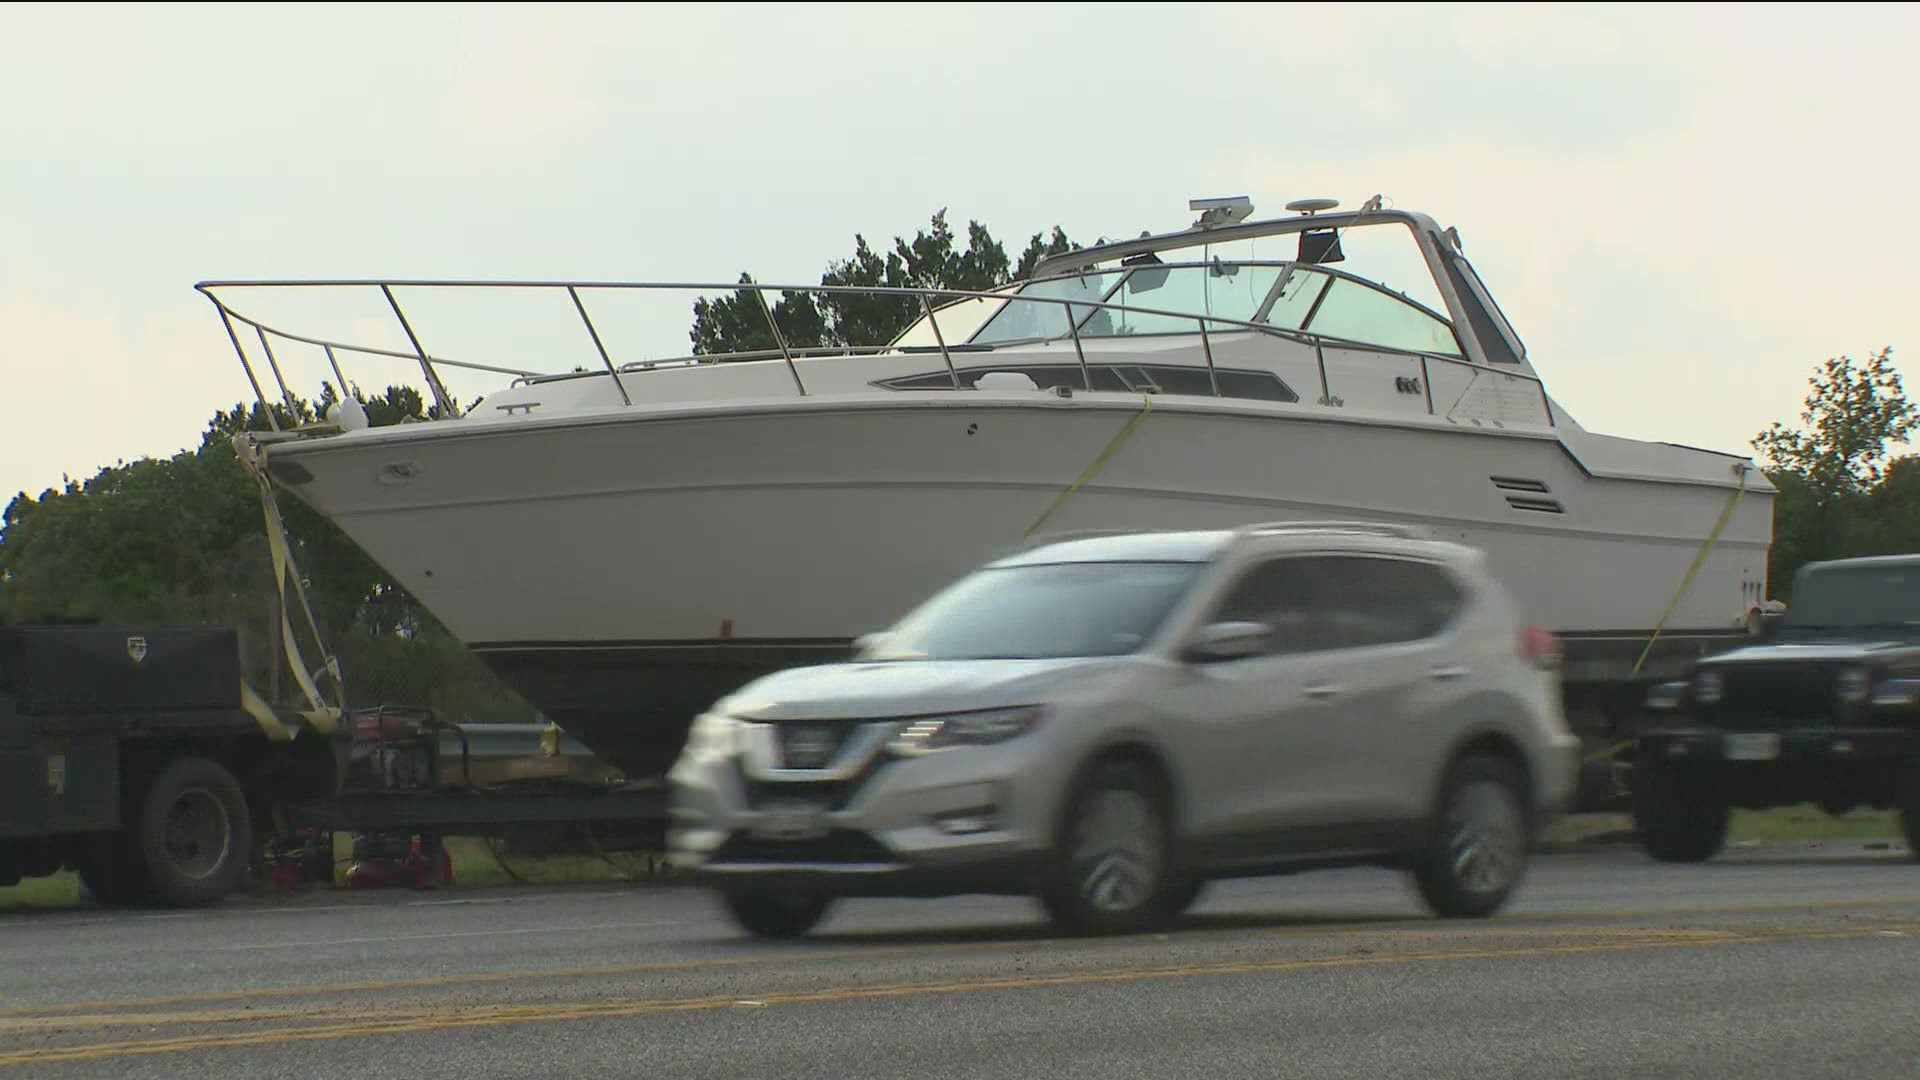 There's a shipwreck of sorts on the side of SH 71. The boat sparked a frenzy on social media.